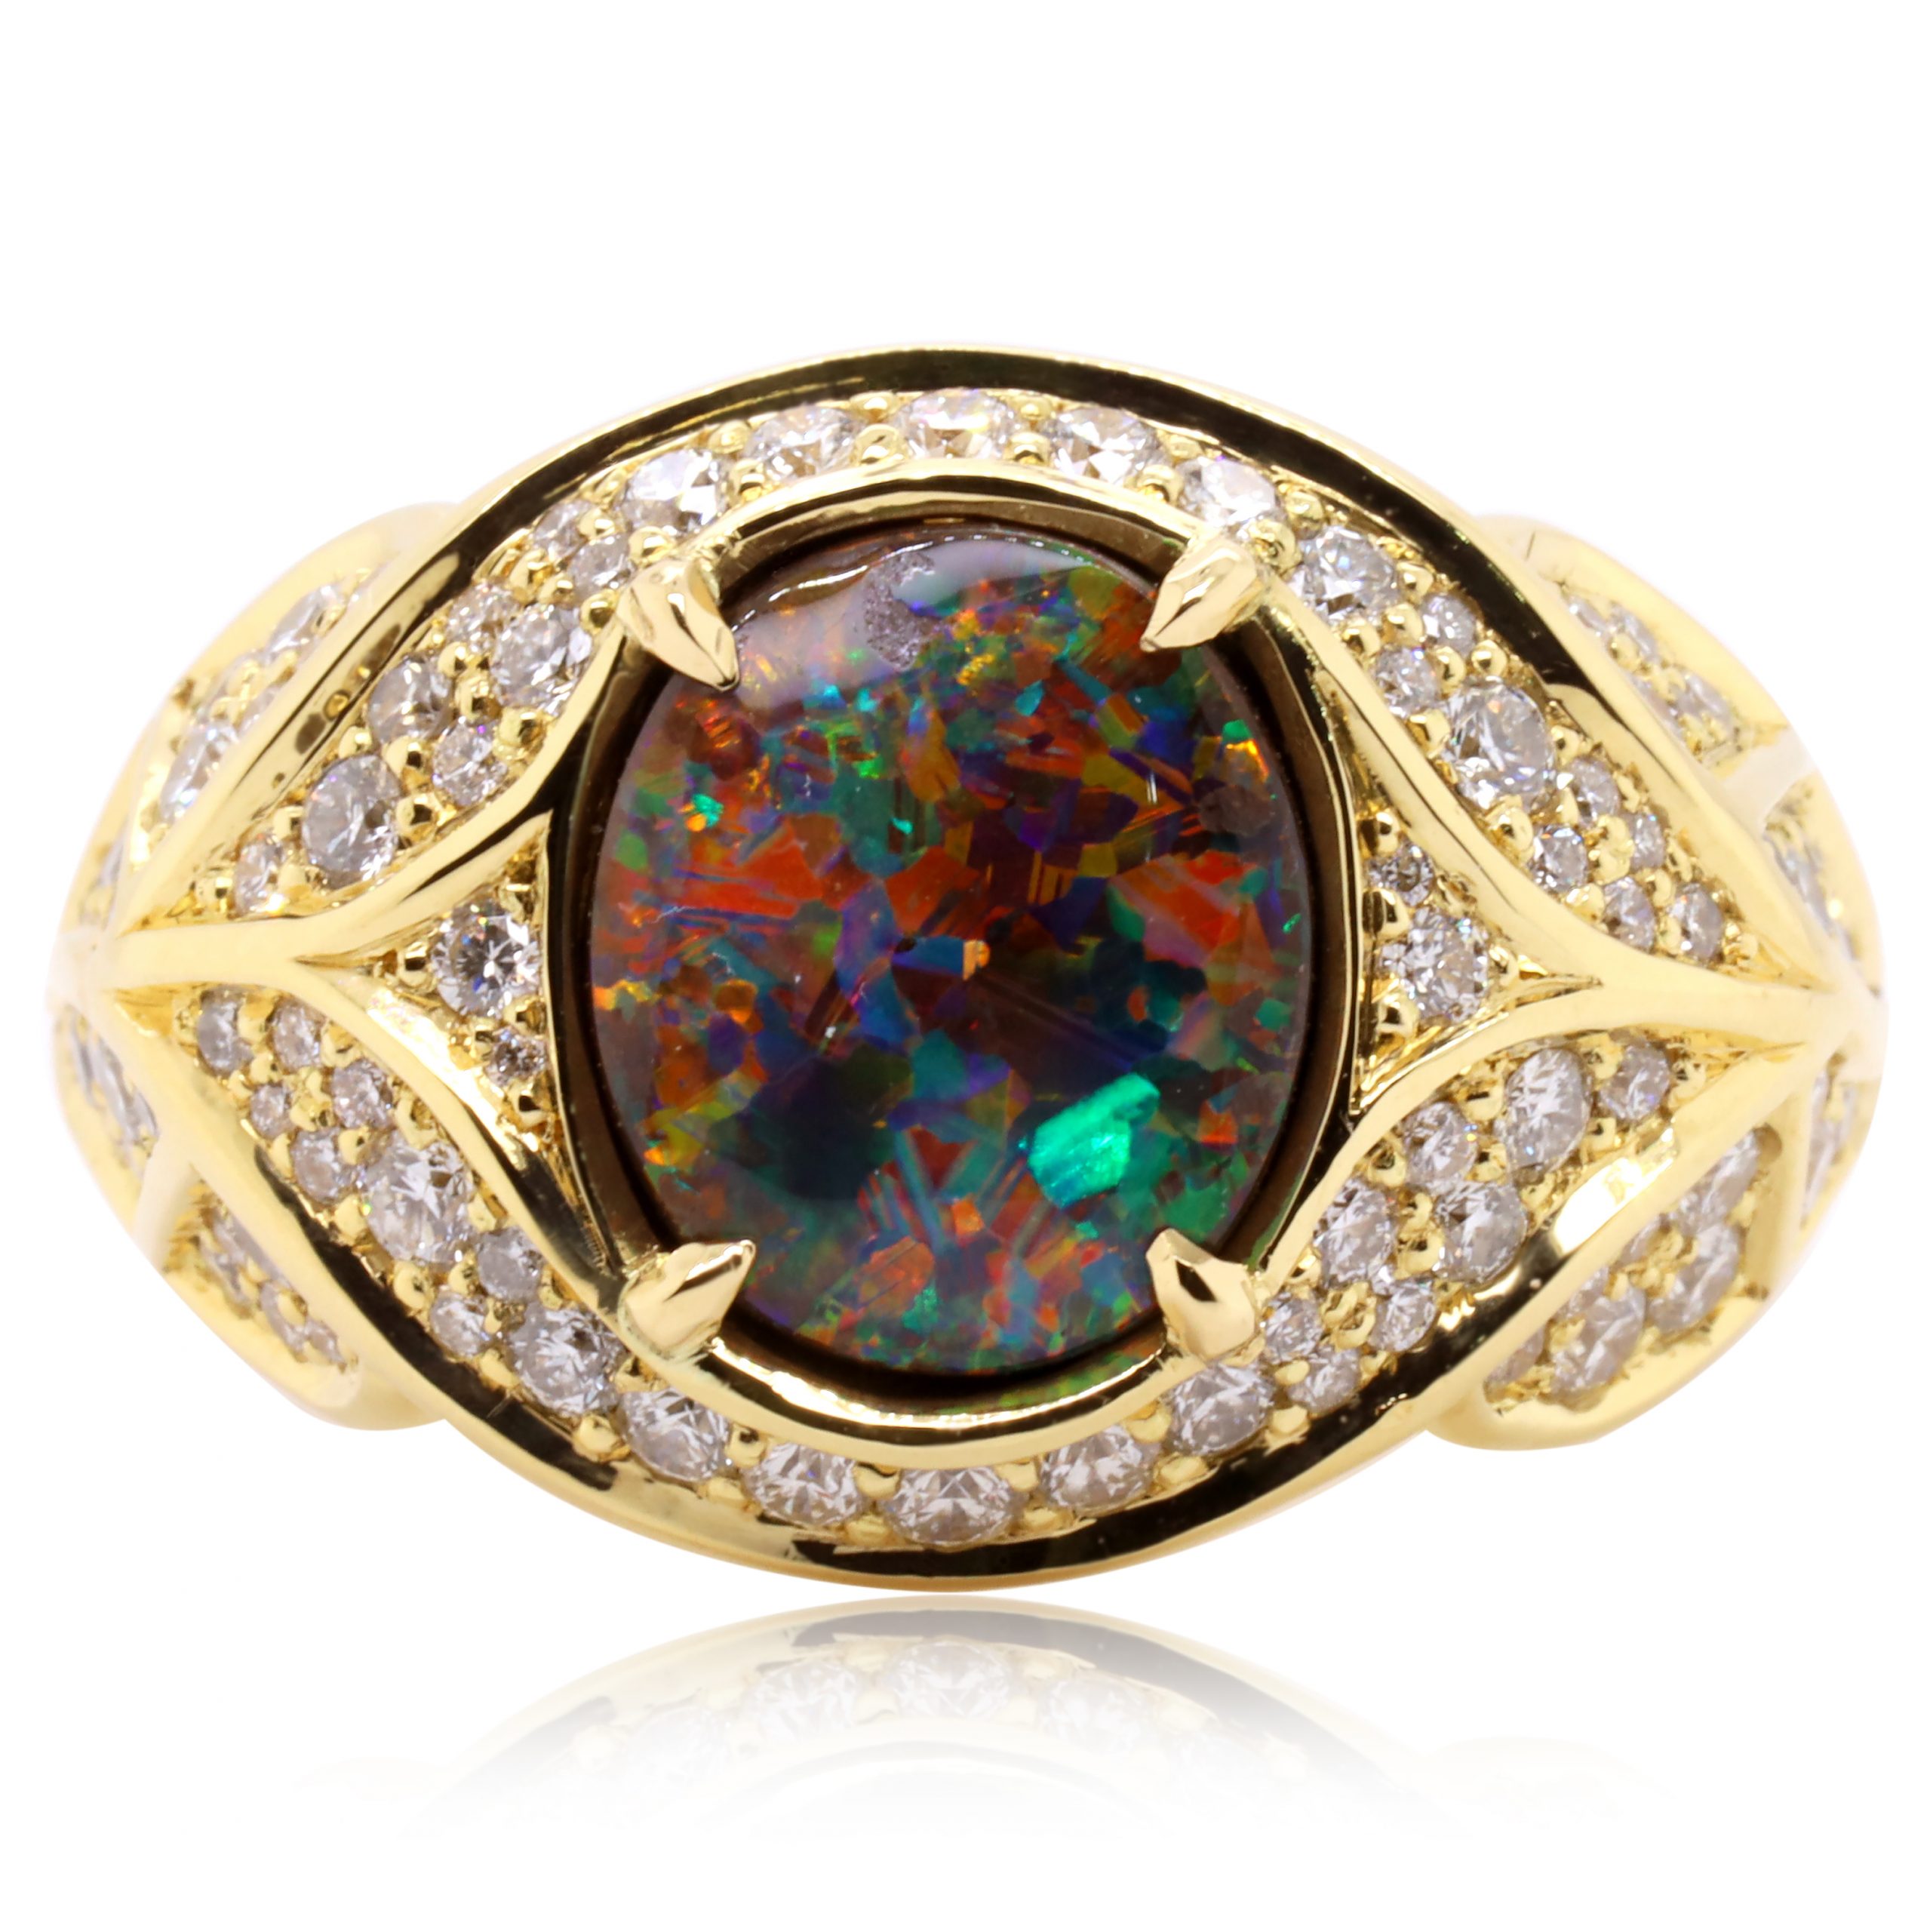 30 Beautiful Opal Engagement Rings - Unique Opal Engagement Rings for Brides